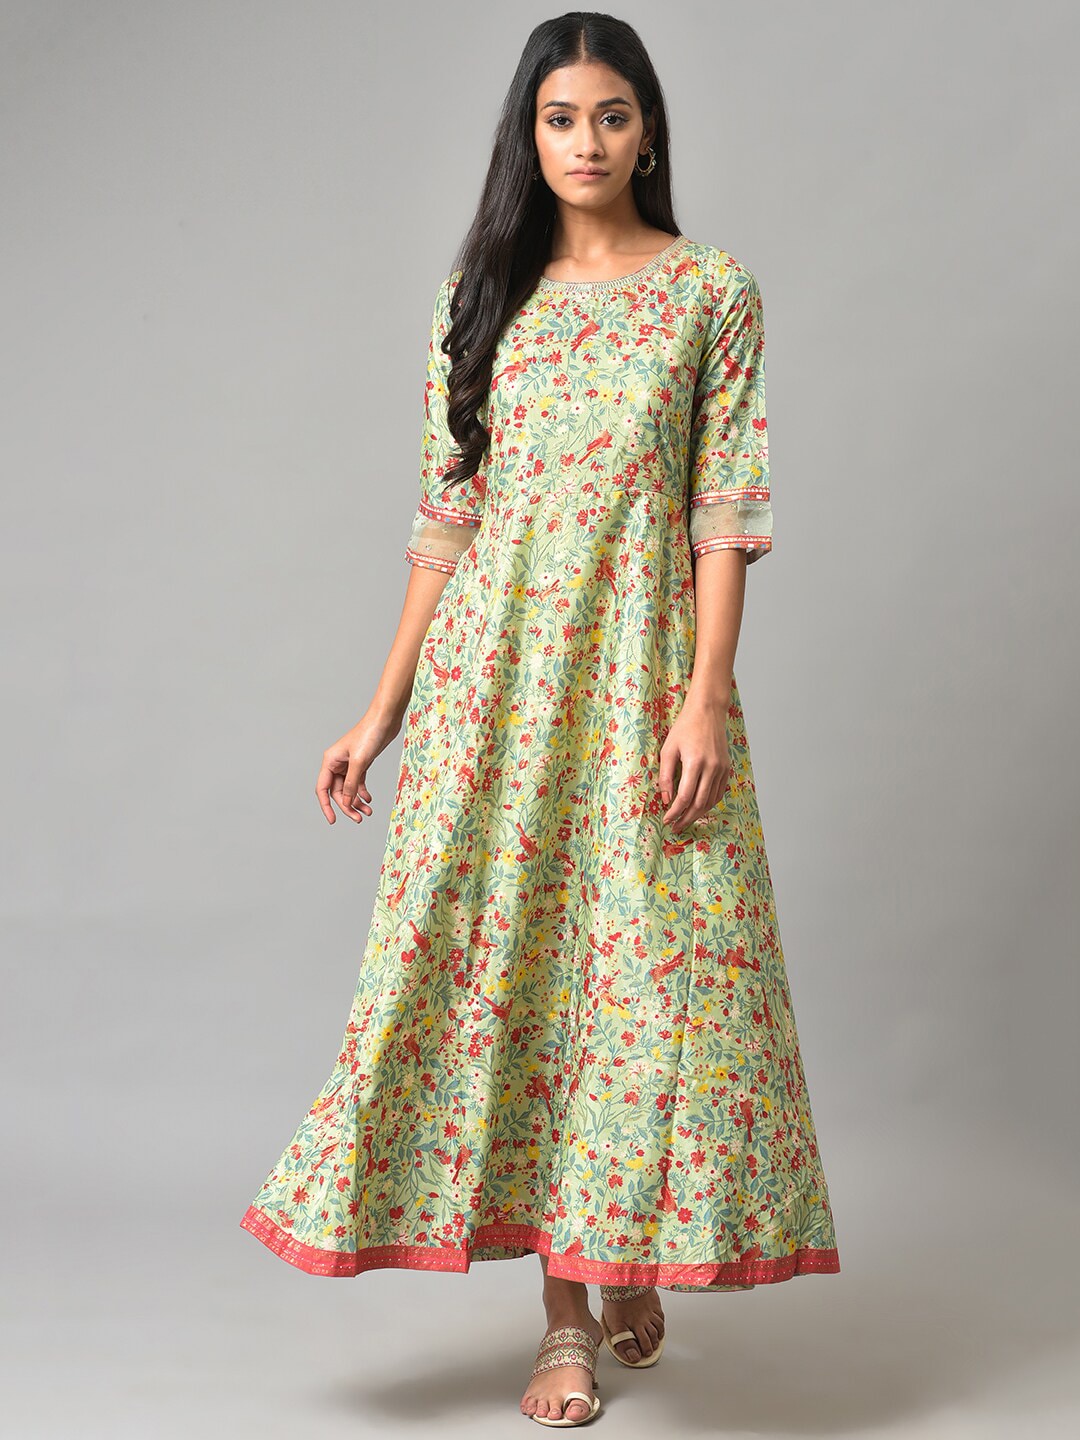 W Floral Printed Ethnic Maxi Dress Price in India